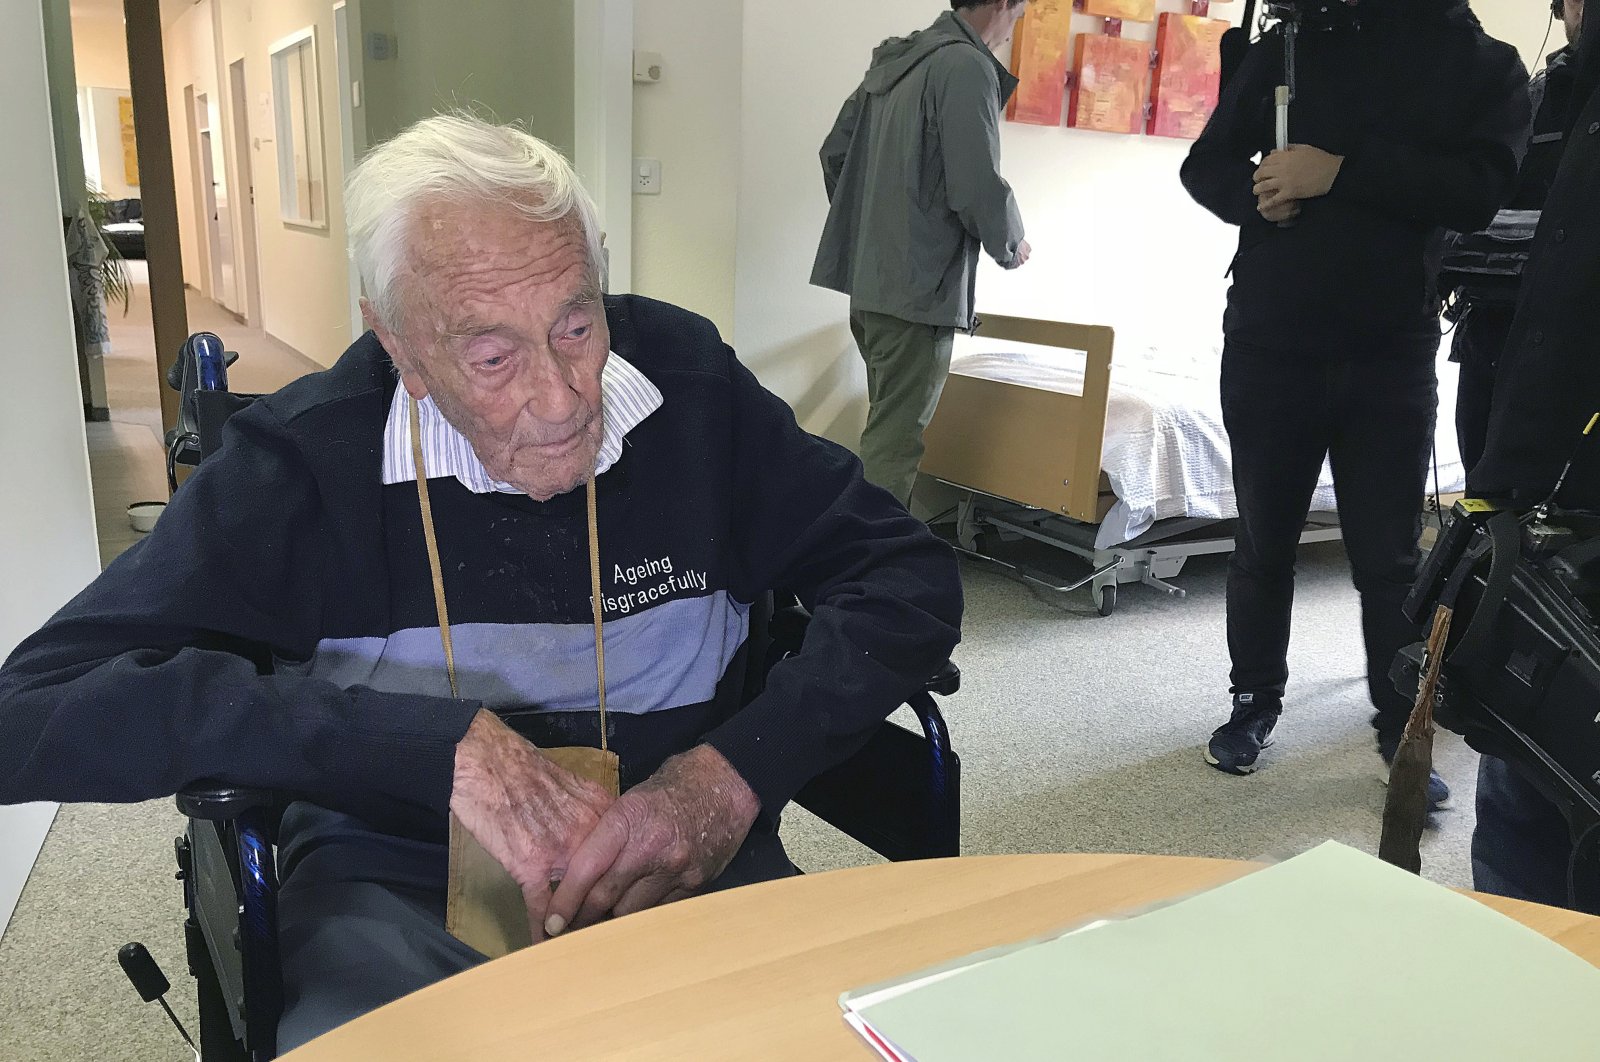 Picture shows 104-year-old Australian David Goodall in a room in Liestal near Basel, Switzerland, where he plans to end his life on Thursday, May 10, 2018. (AP Photo)